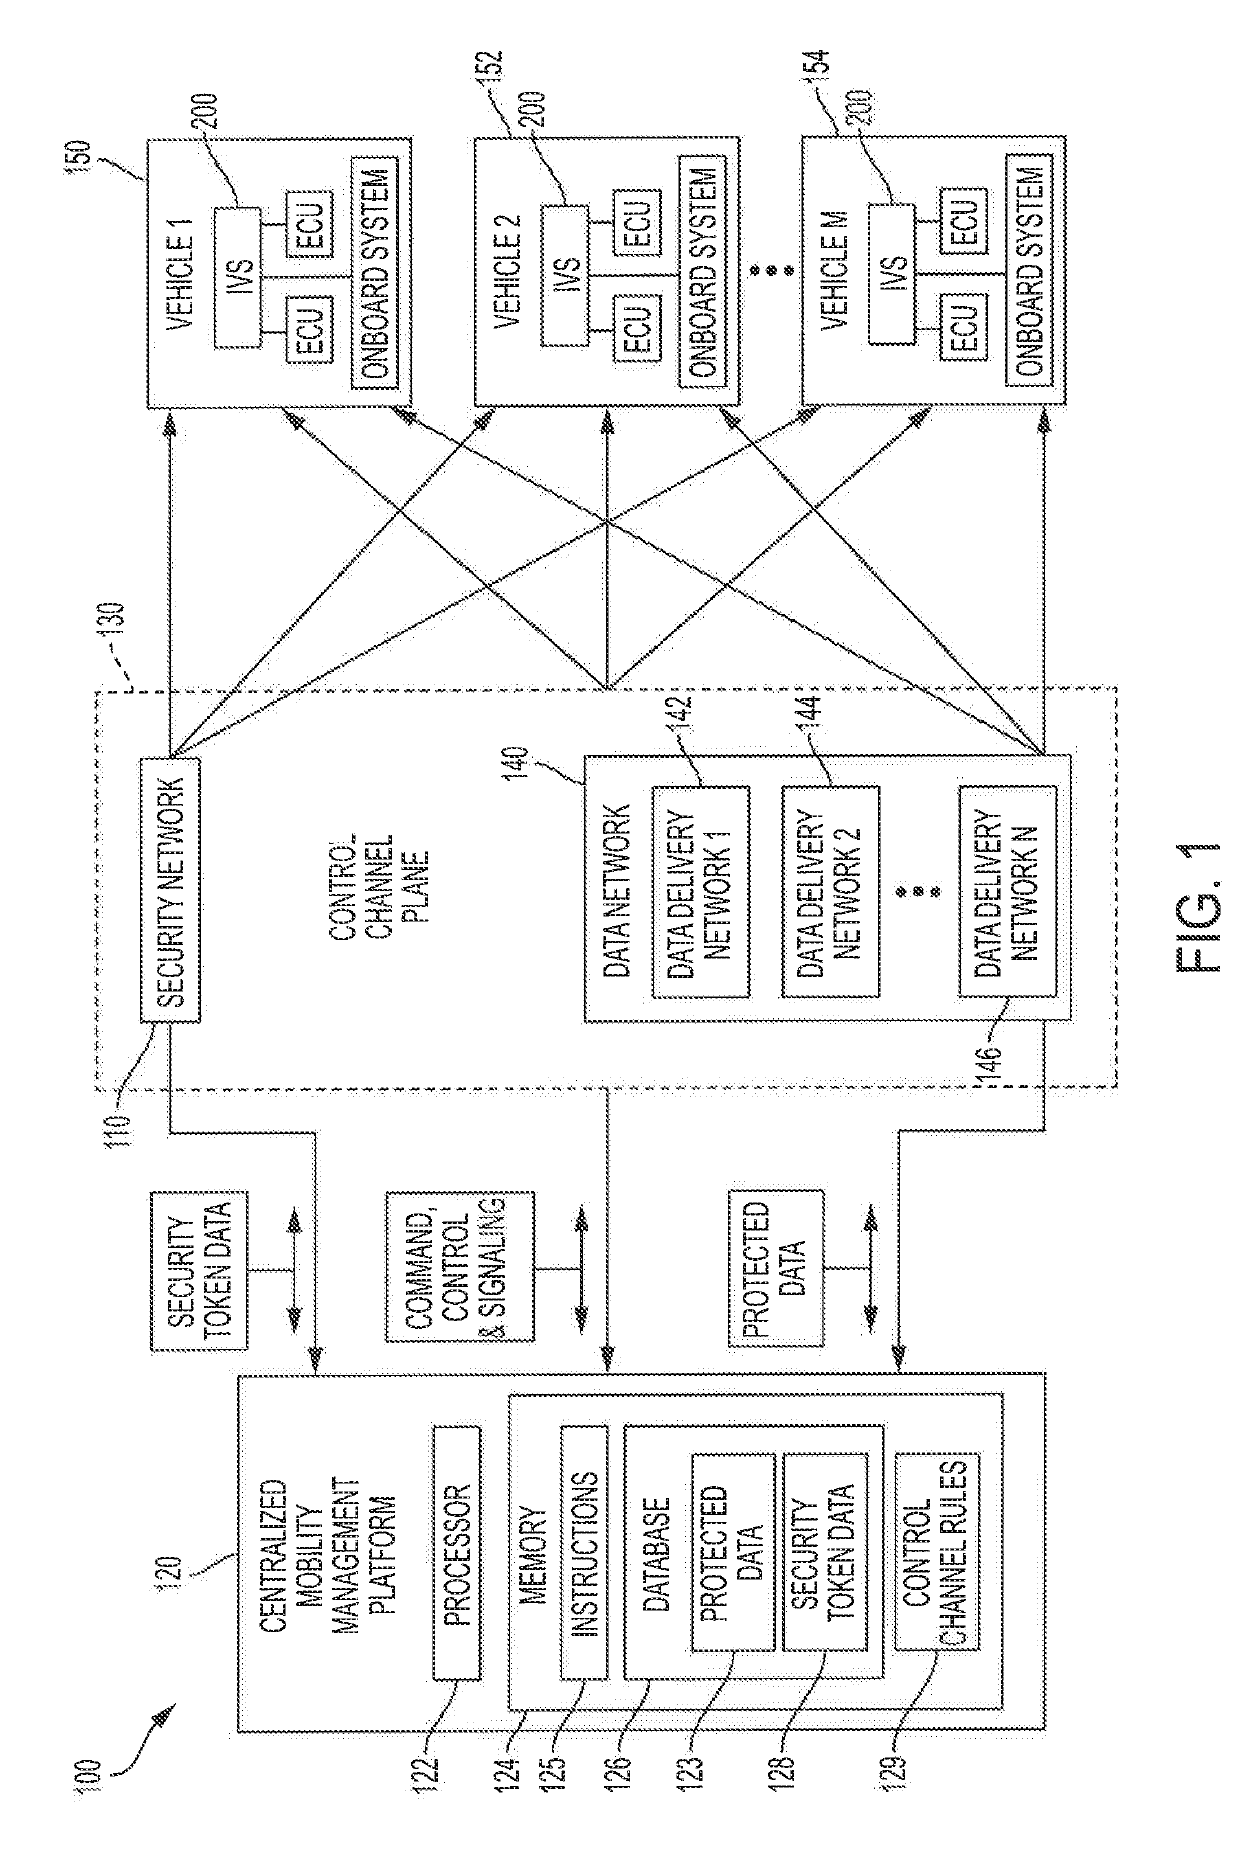 Systems and methods for reliably providing a control channel for communicating control information with automotive electronic control units